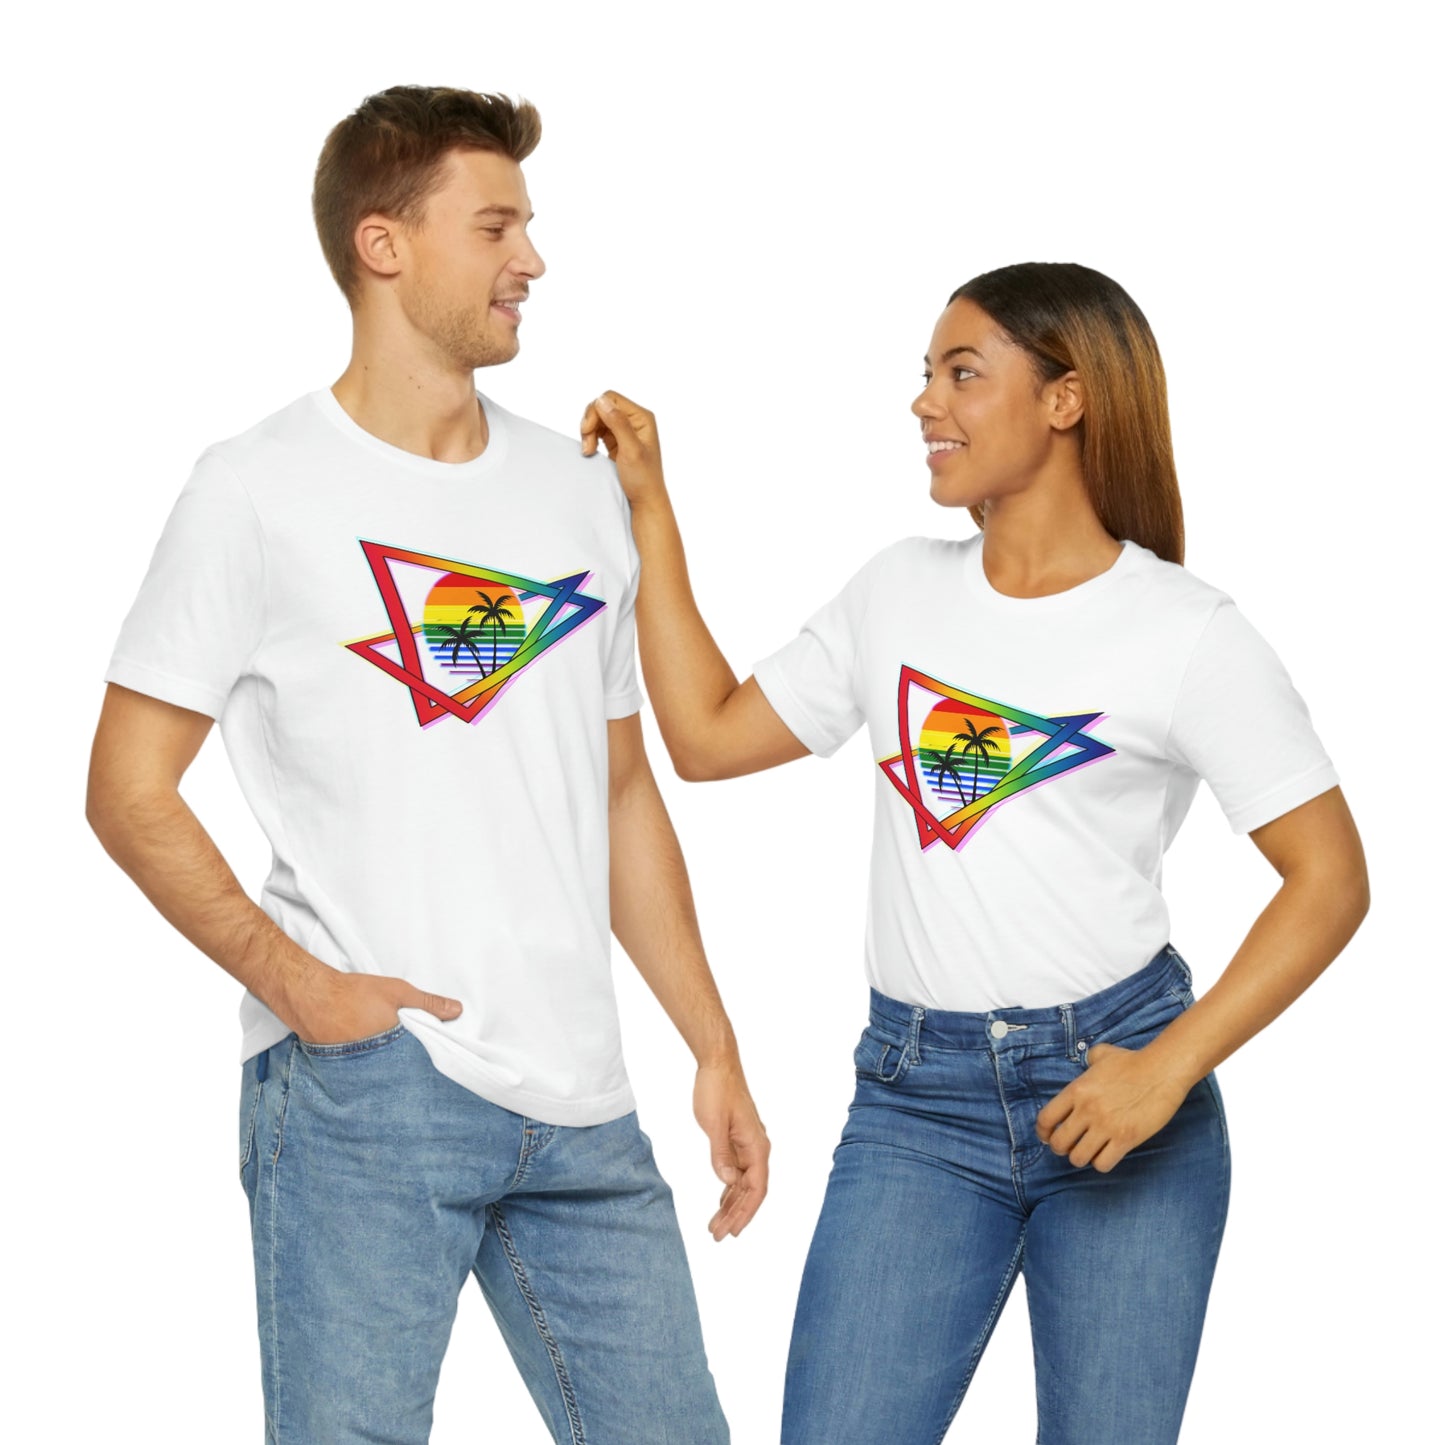 Outrun Style Rainbow Pride Shirt Lord and Lady Towers